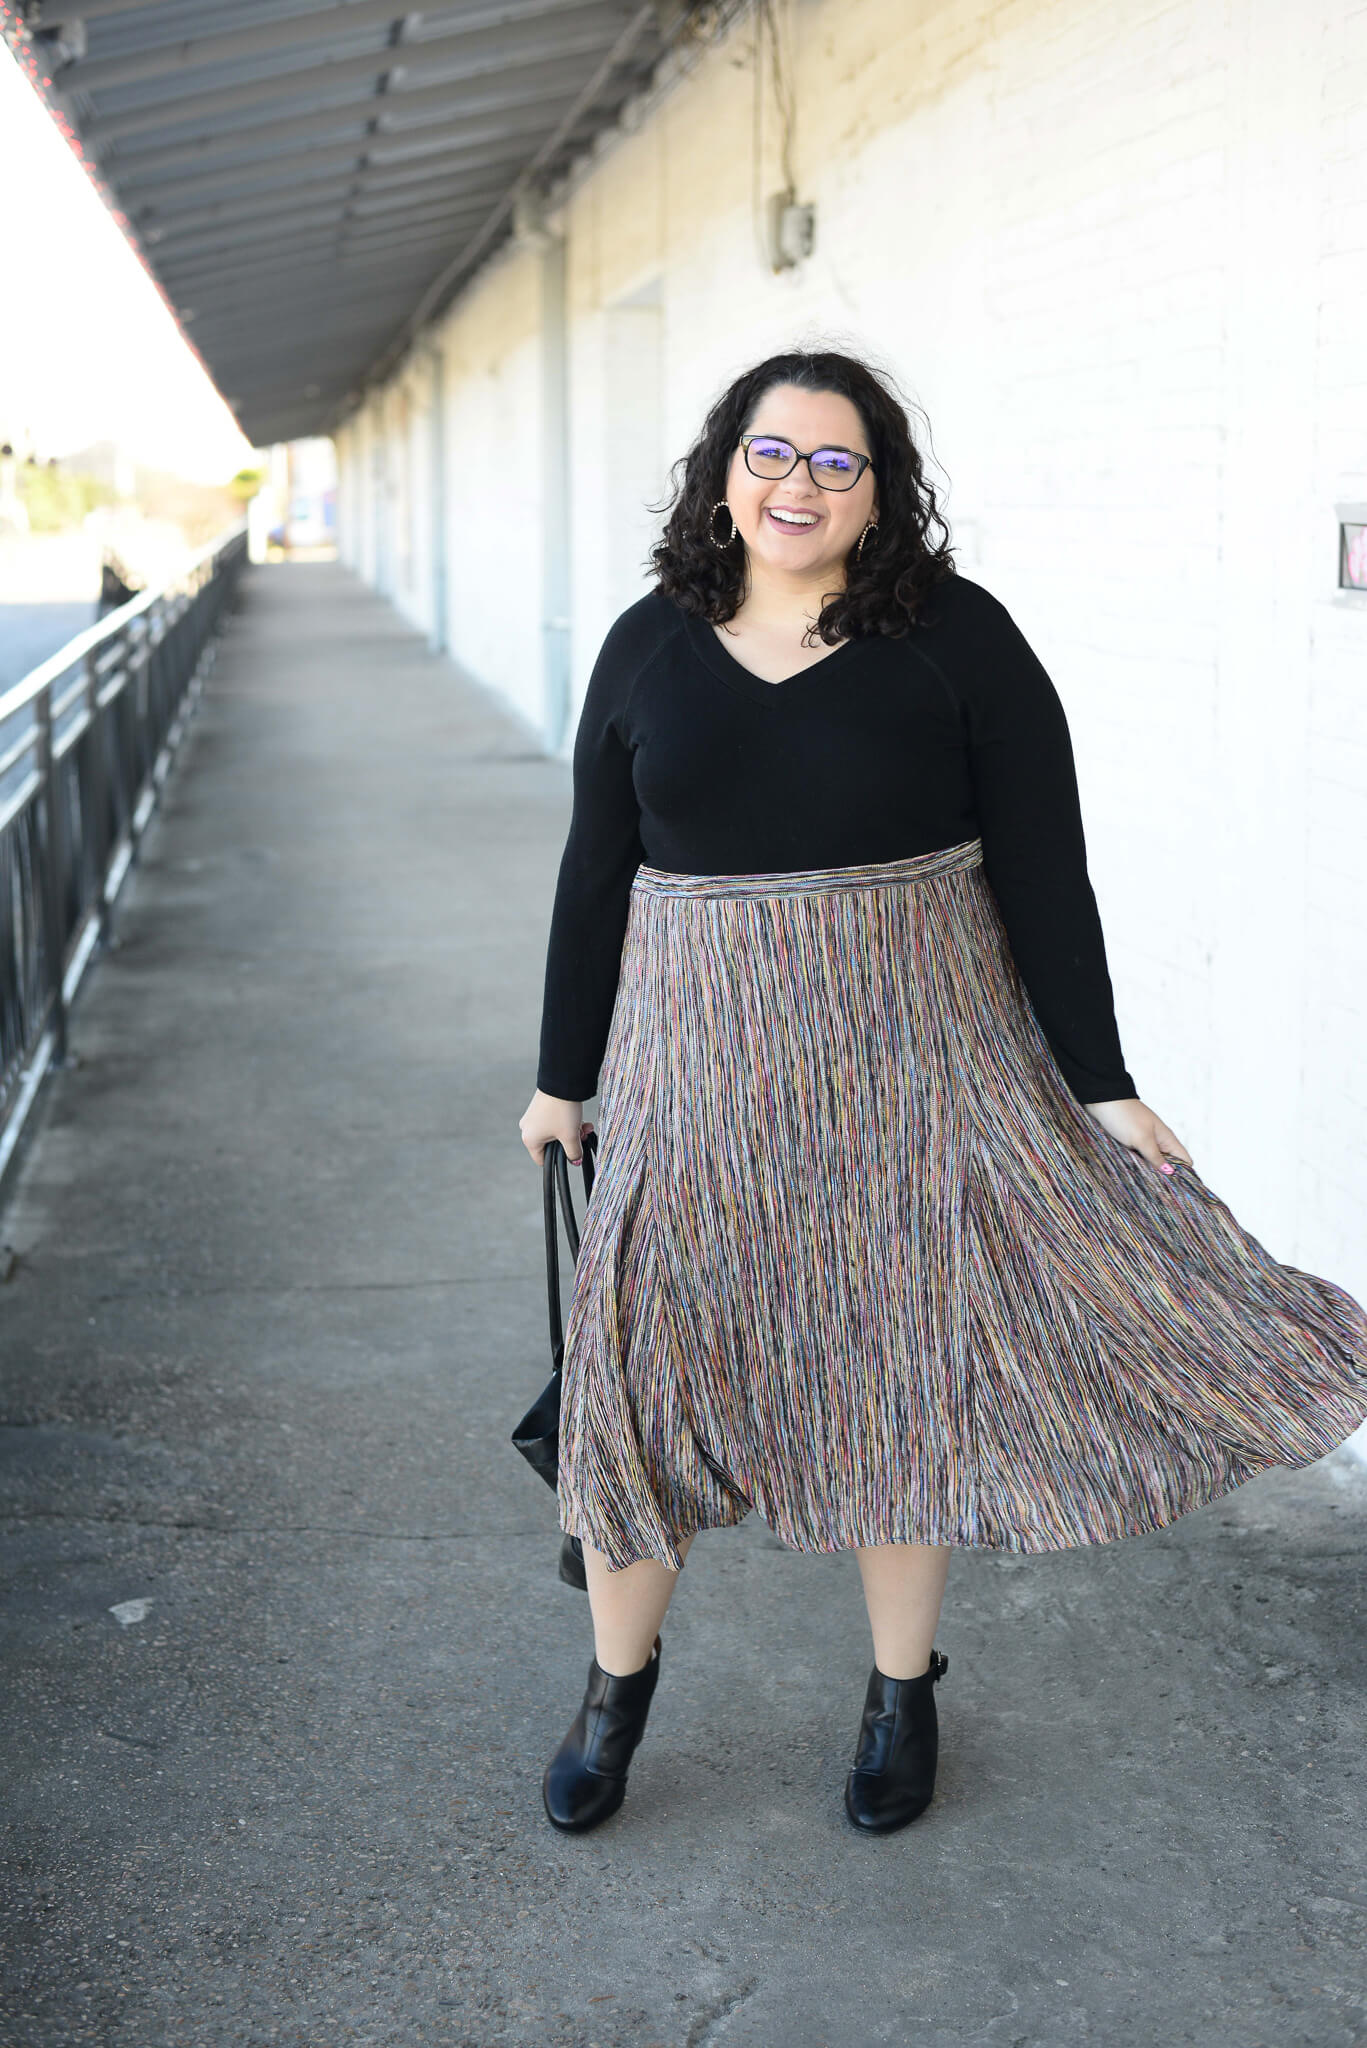 Living my best boss babe life in this plus size skirt from Anthropologie 